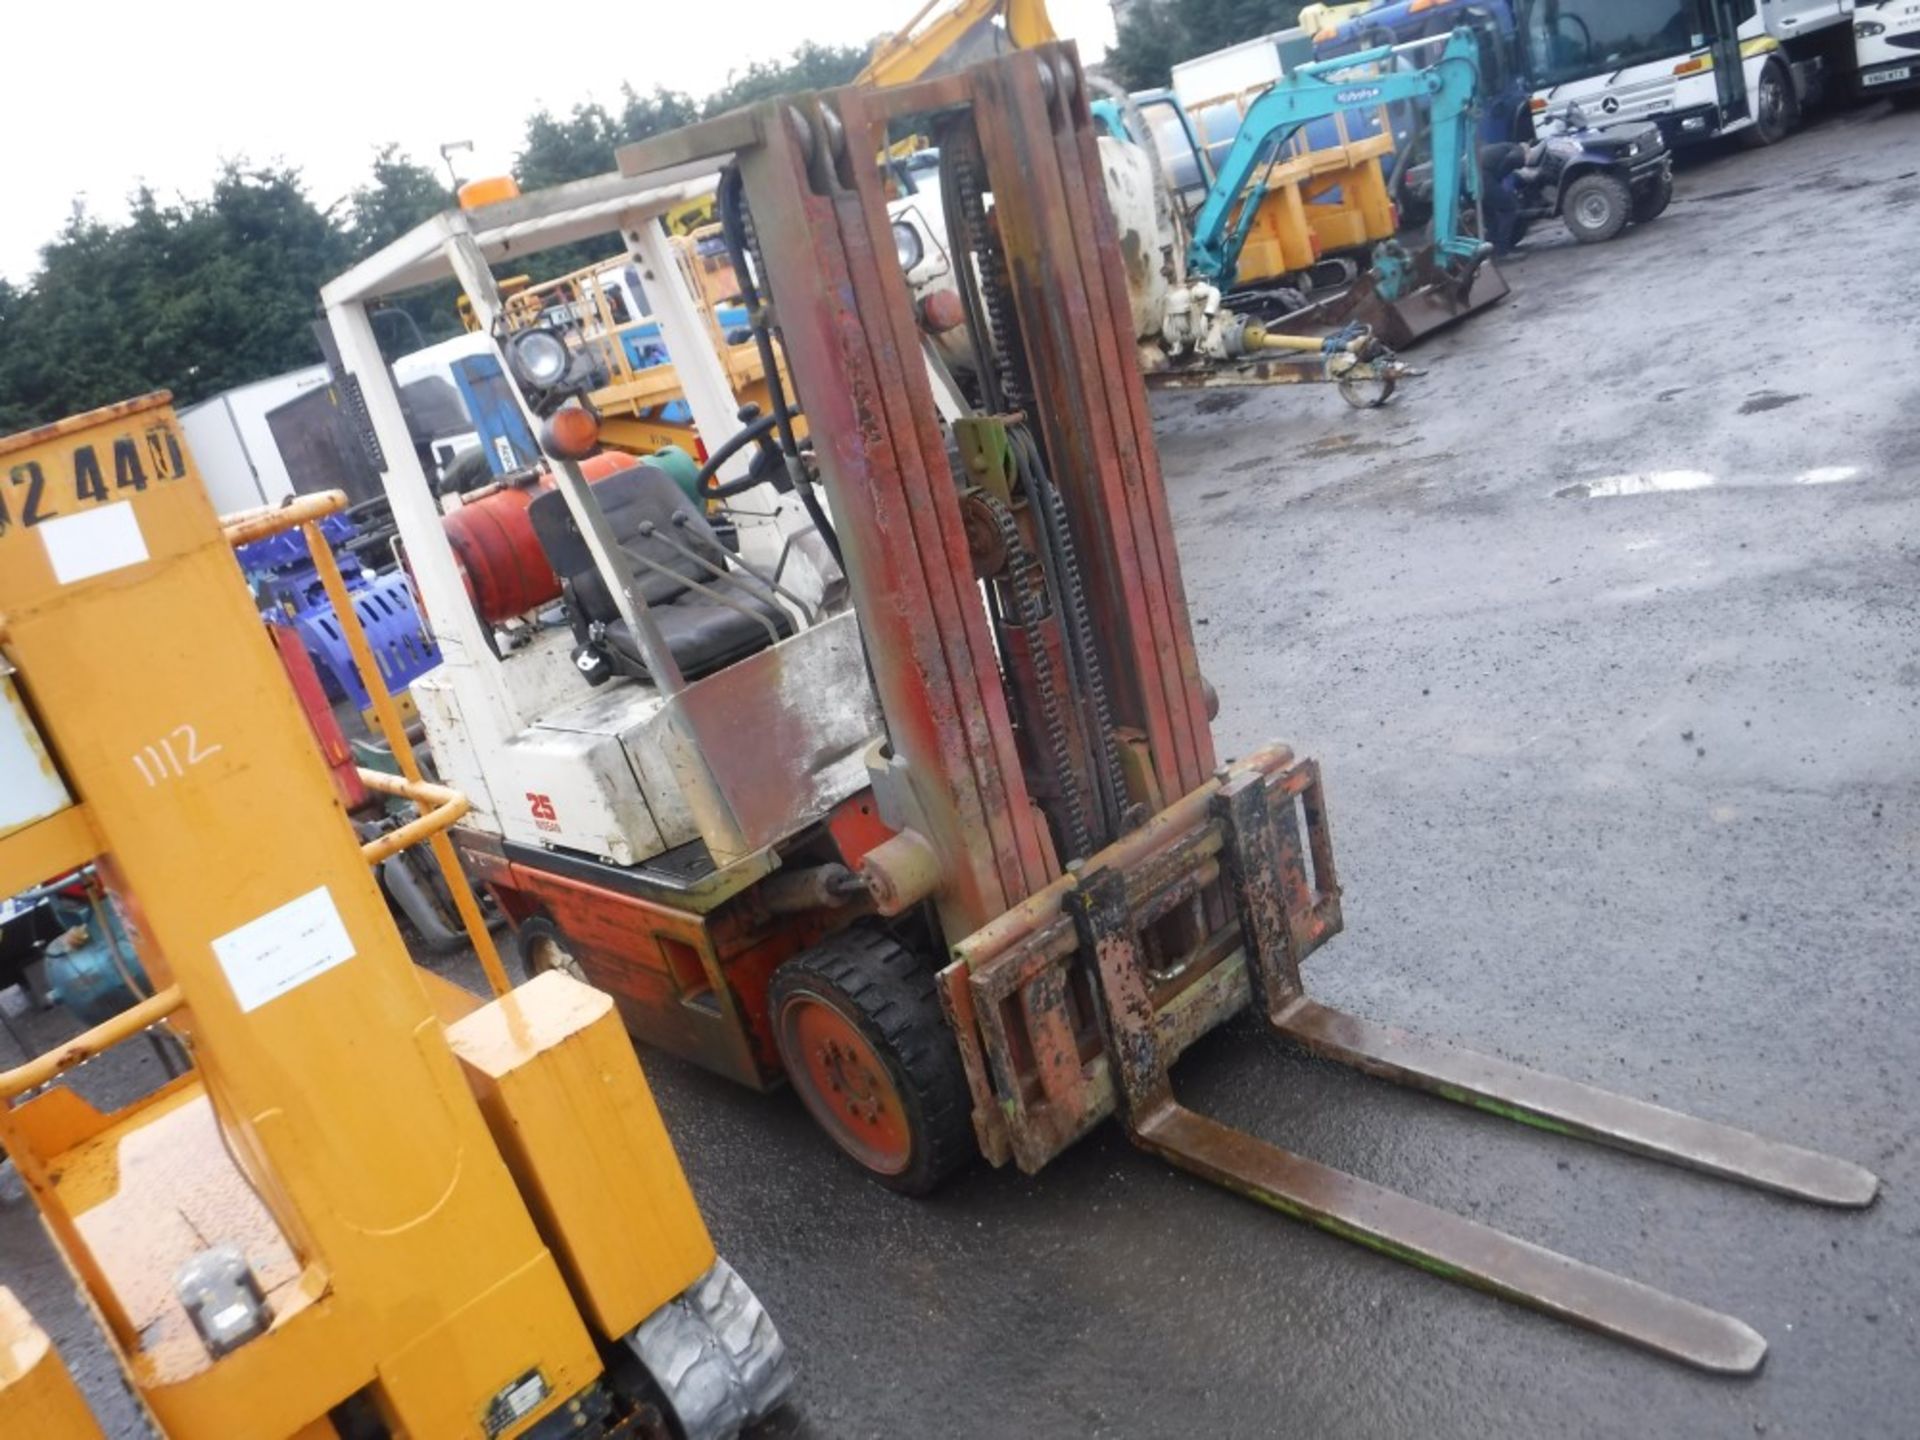 NISSAN 2.5 TON TRIPLE LOW FREE LIFT MAST FORK LIFT WITH SIDE SHIFT, DUAL FUEL [+ VAT]